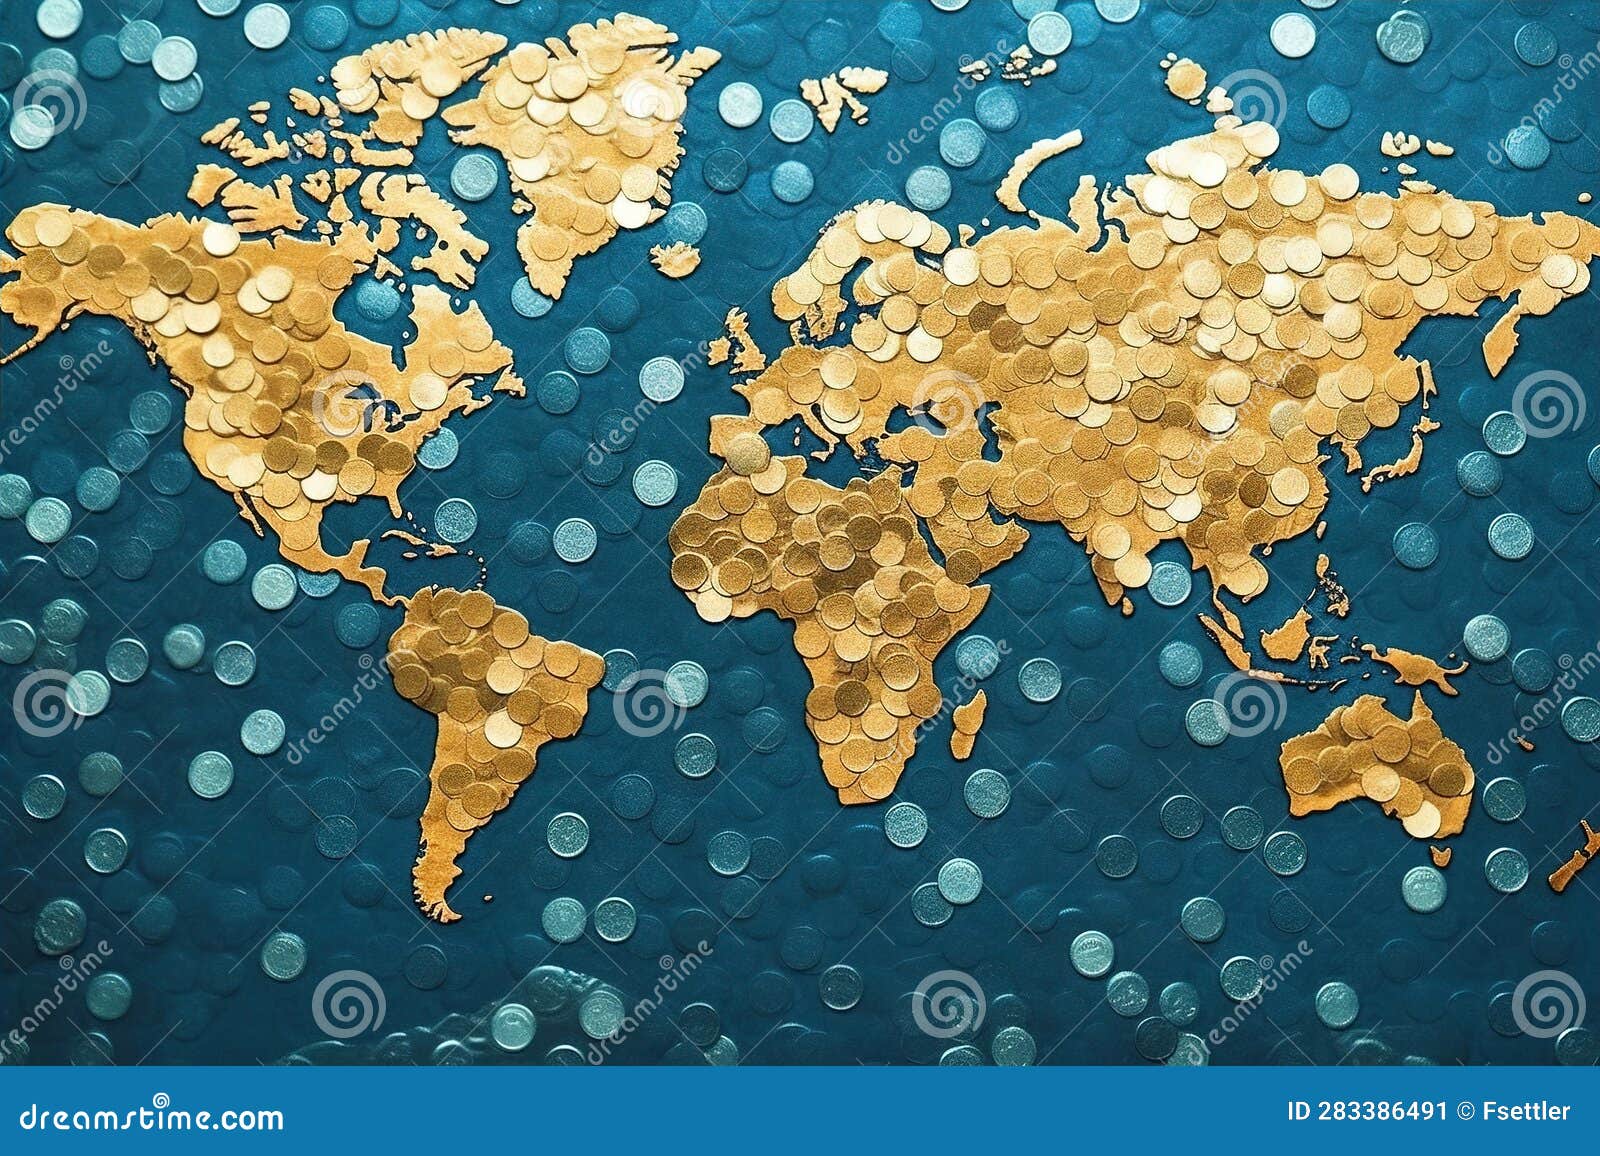 The World Map is Made Up of Many Gold Coins. Stock Illustration ...